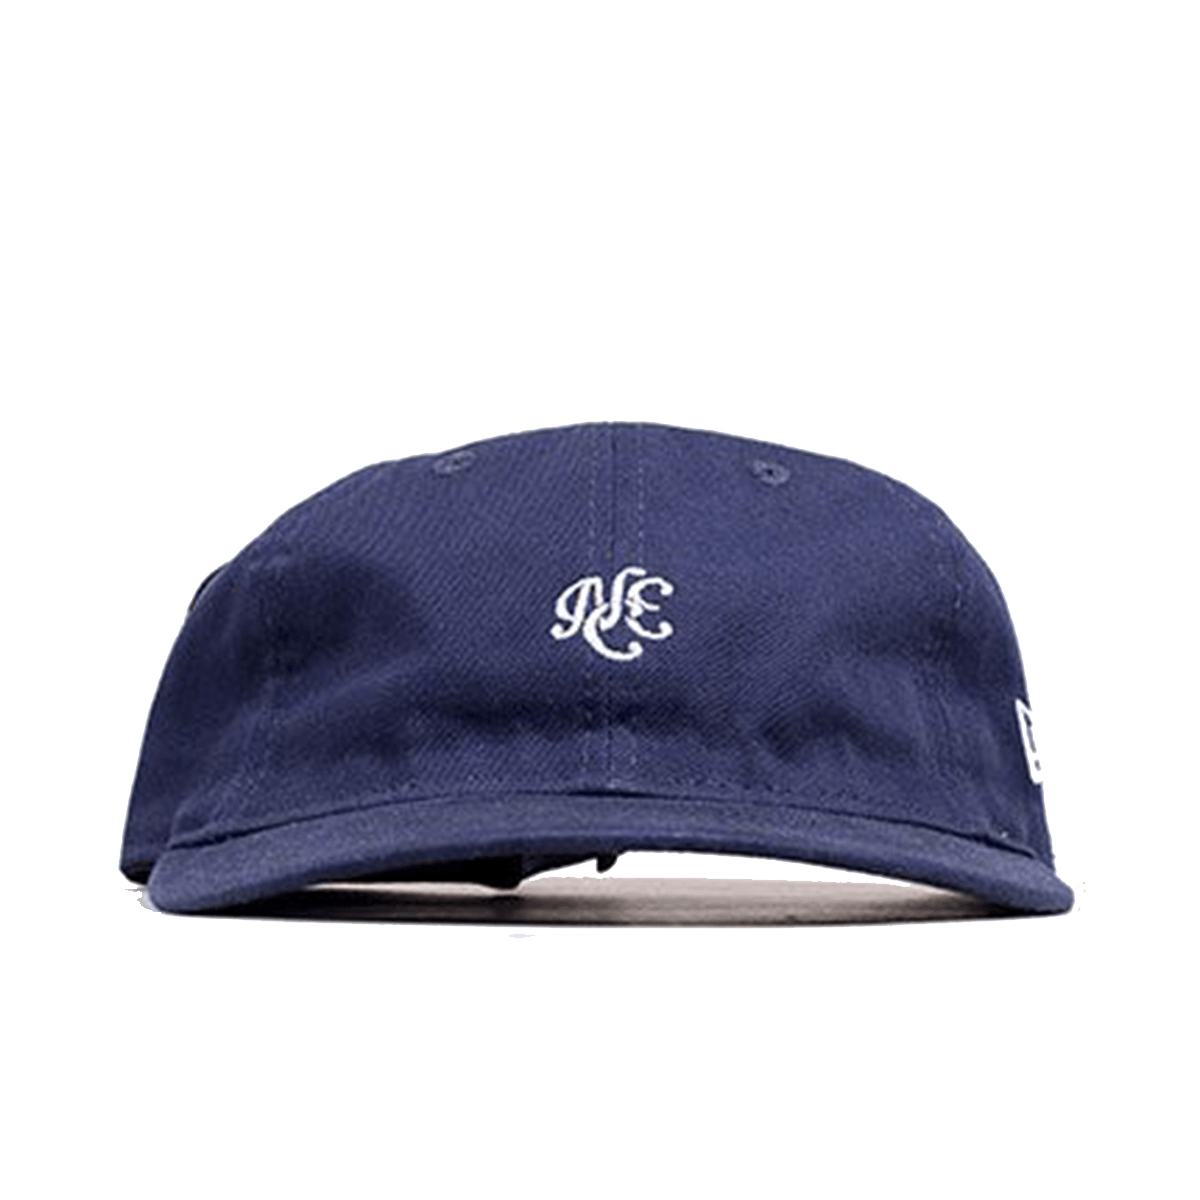 UNSTRUCTURED 9FIFTY STRAPBACK LNV 9FIFTY imagine noua